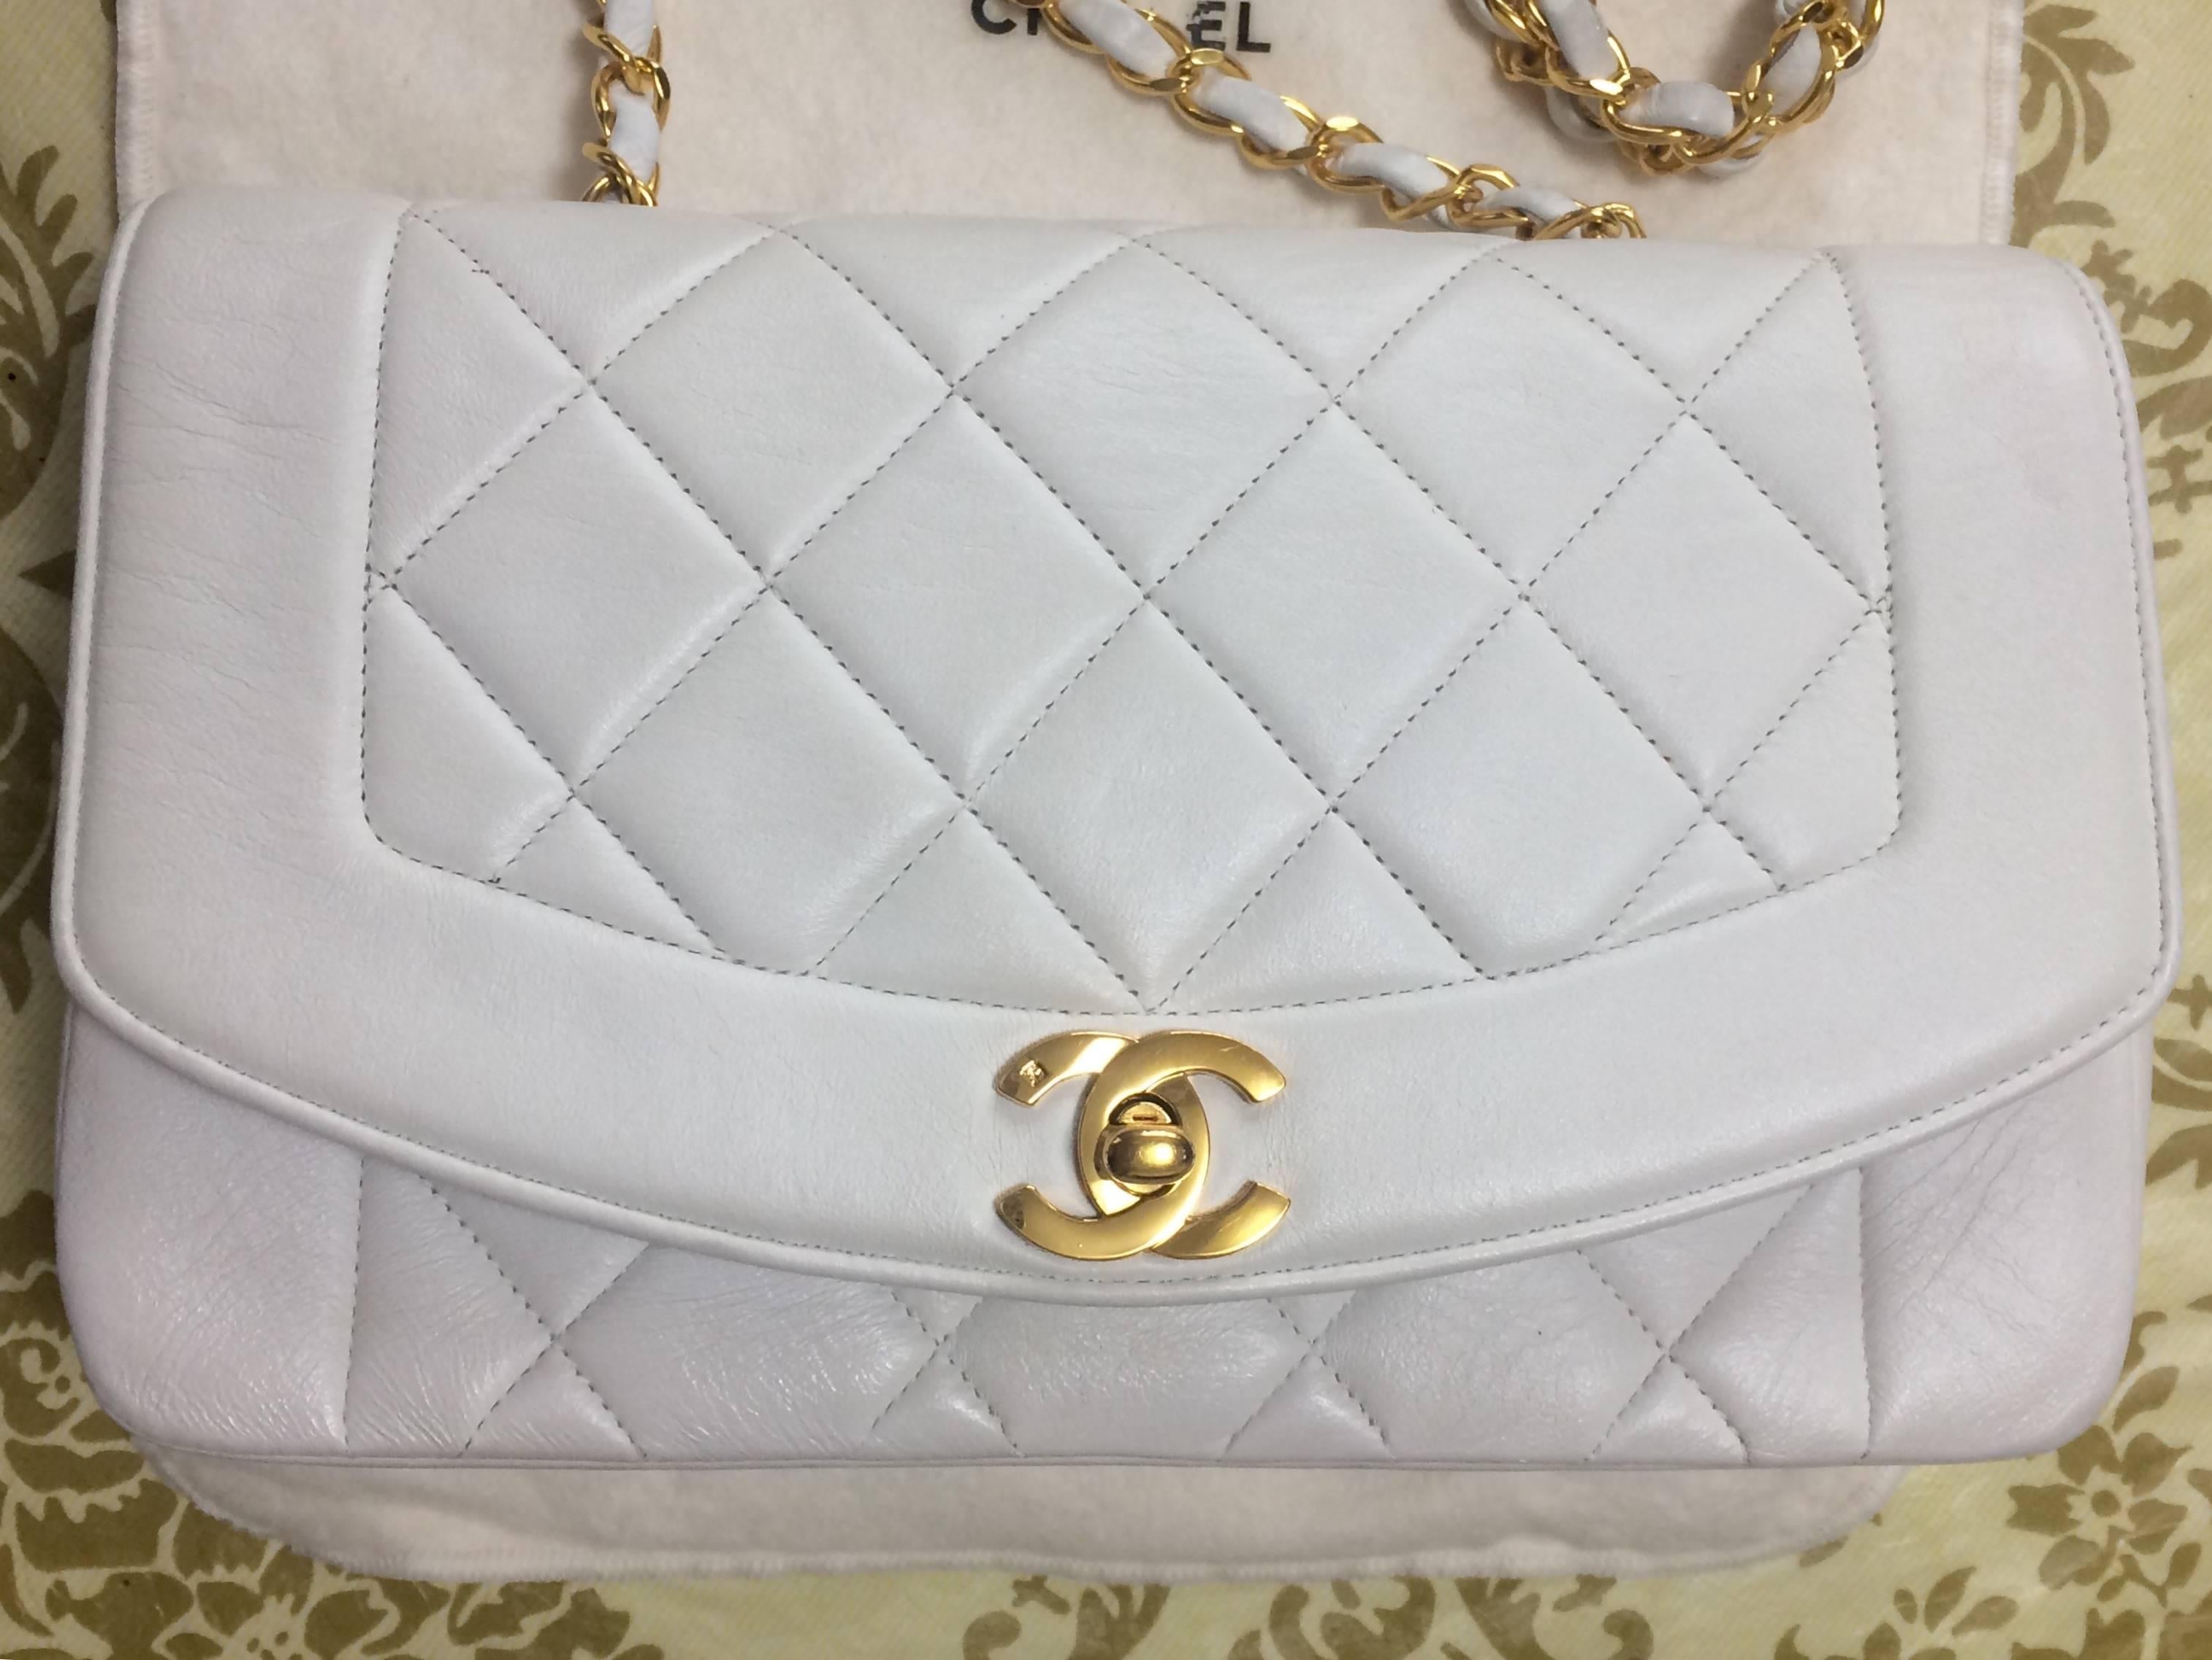 Beautiful vintage condition!


Introducing one of the most popular pieces from CHANEL back in the era, vintage Chanel classic 2.55 white color lamb leather shoulder bag with golden CC closure and chain strap. 

This classic purse will be lovable for